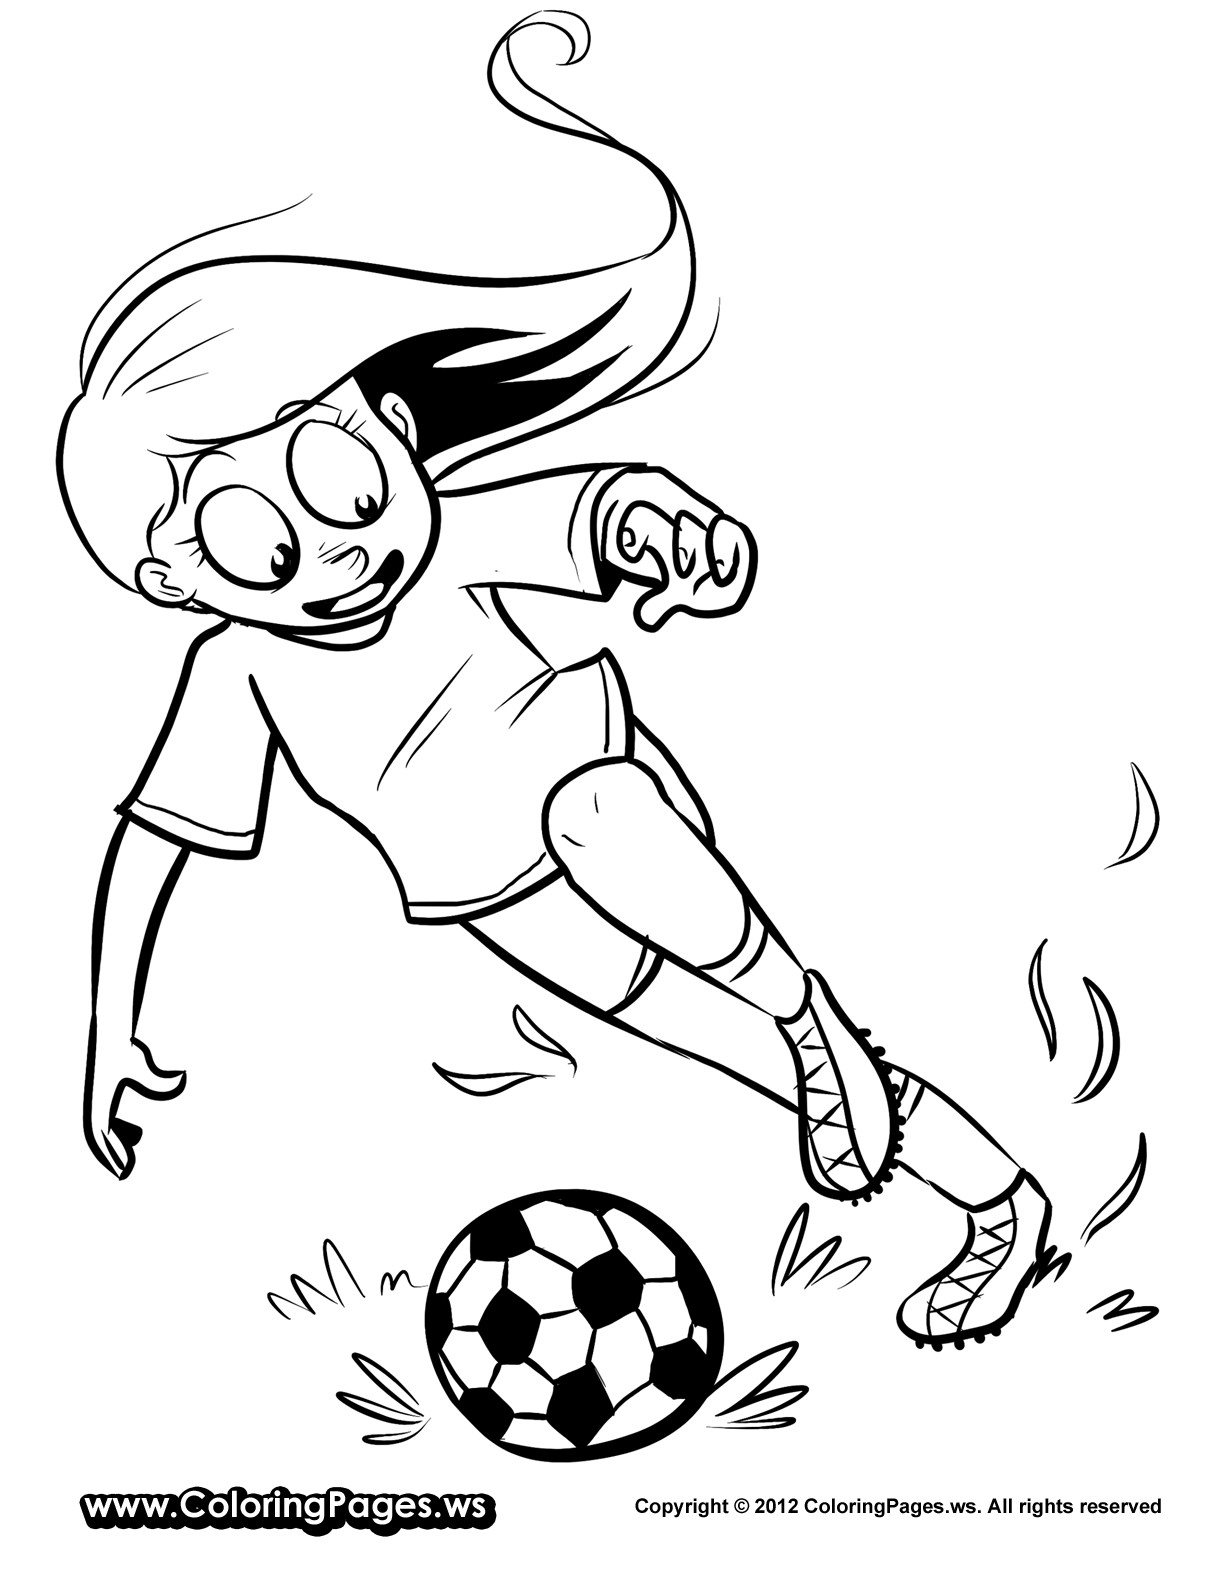 Coloring Sheets For Boys Soccer
 Soccer Coloring Pages For Boys – Color Bros